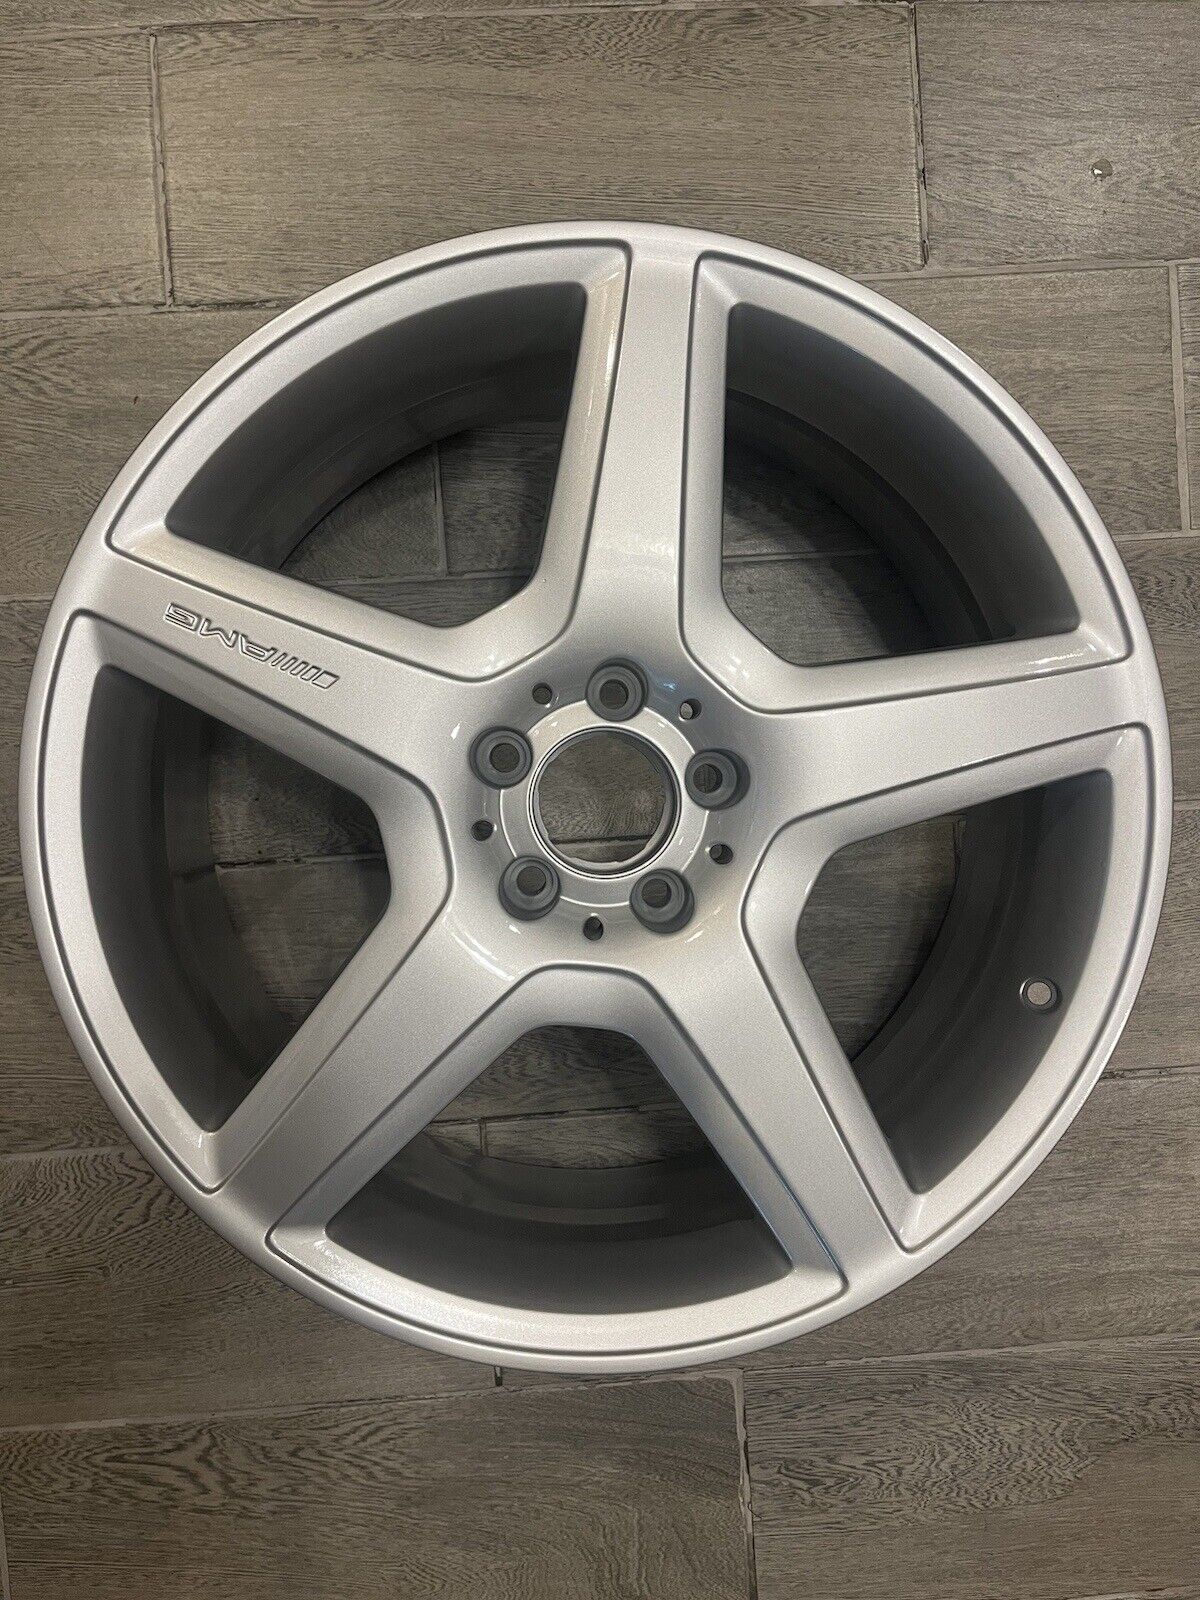 Mercedes Benz AMG Factory Wheel S63 S65 20 x 8.5 S550 S600 OEM A2214012402 85061